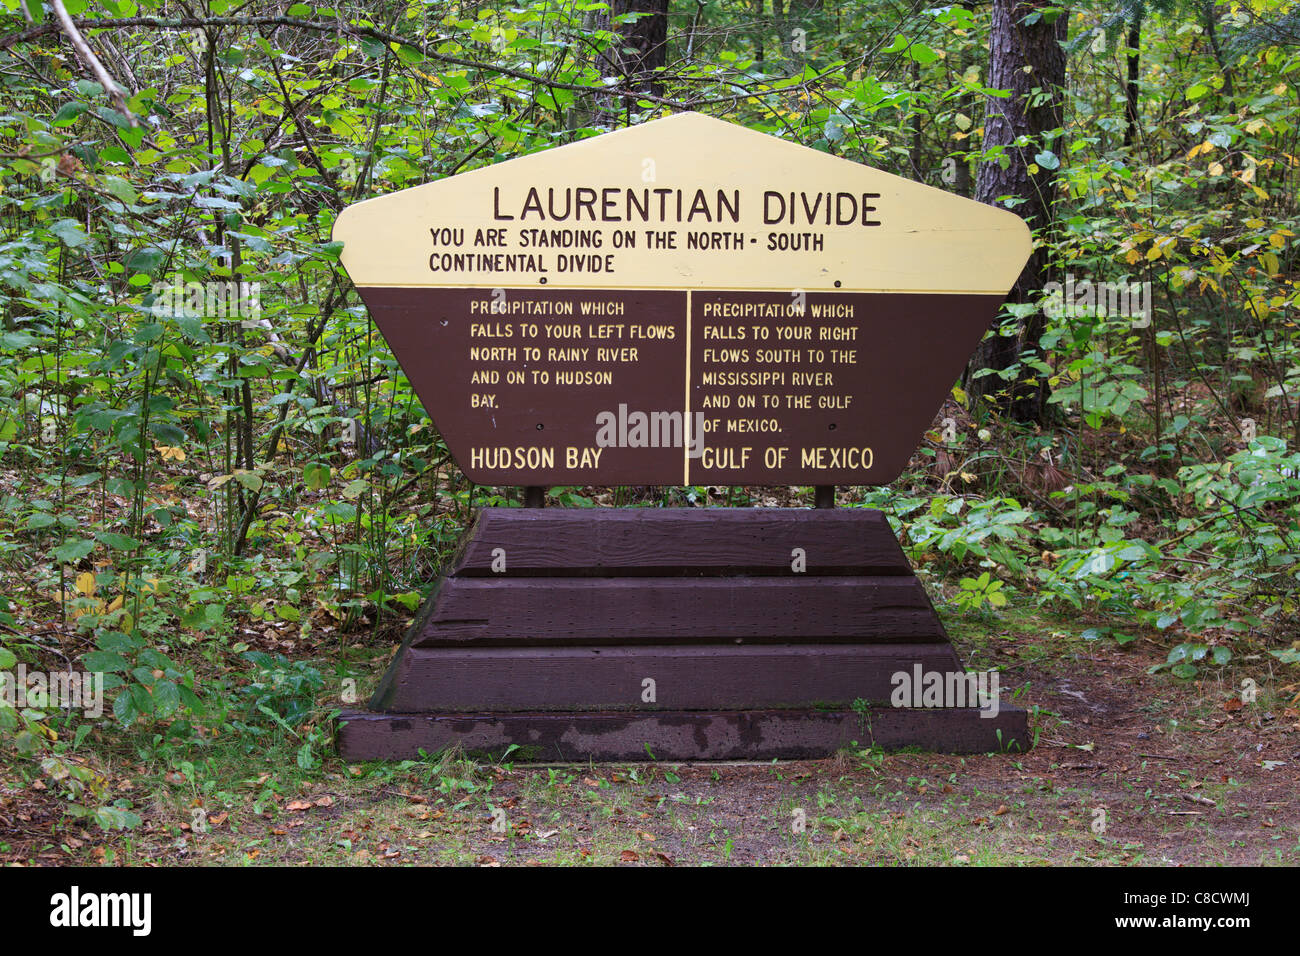 An explanatory sign for the Laurentian Divide in Chippewa National Forest, Minnesota. Stock Photo